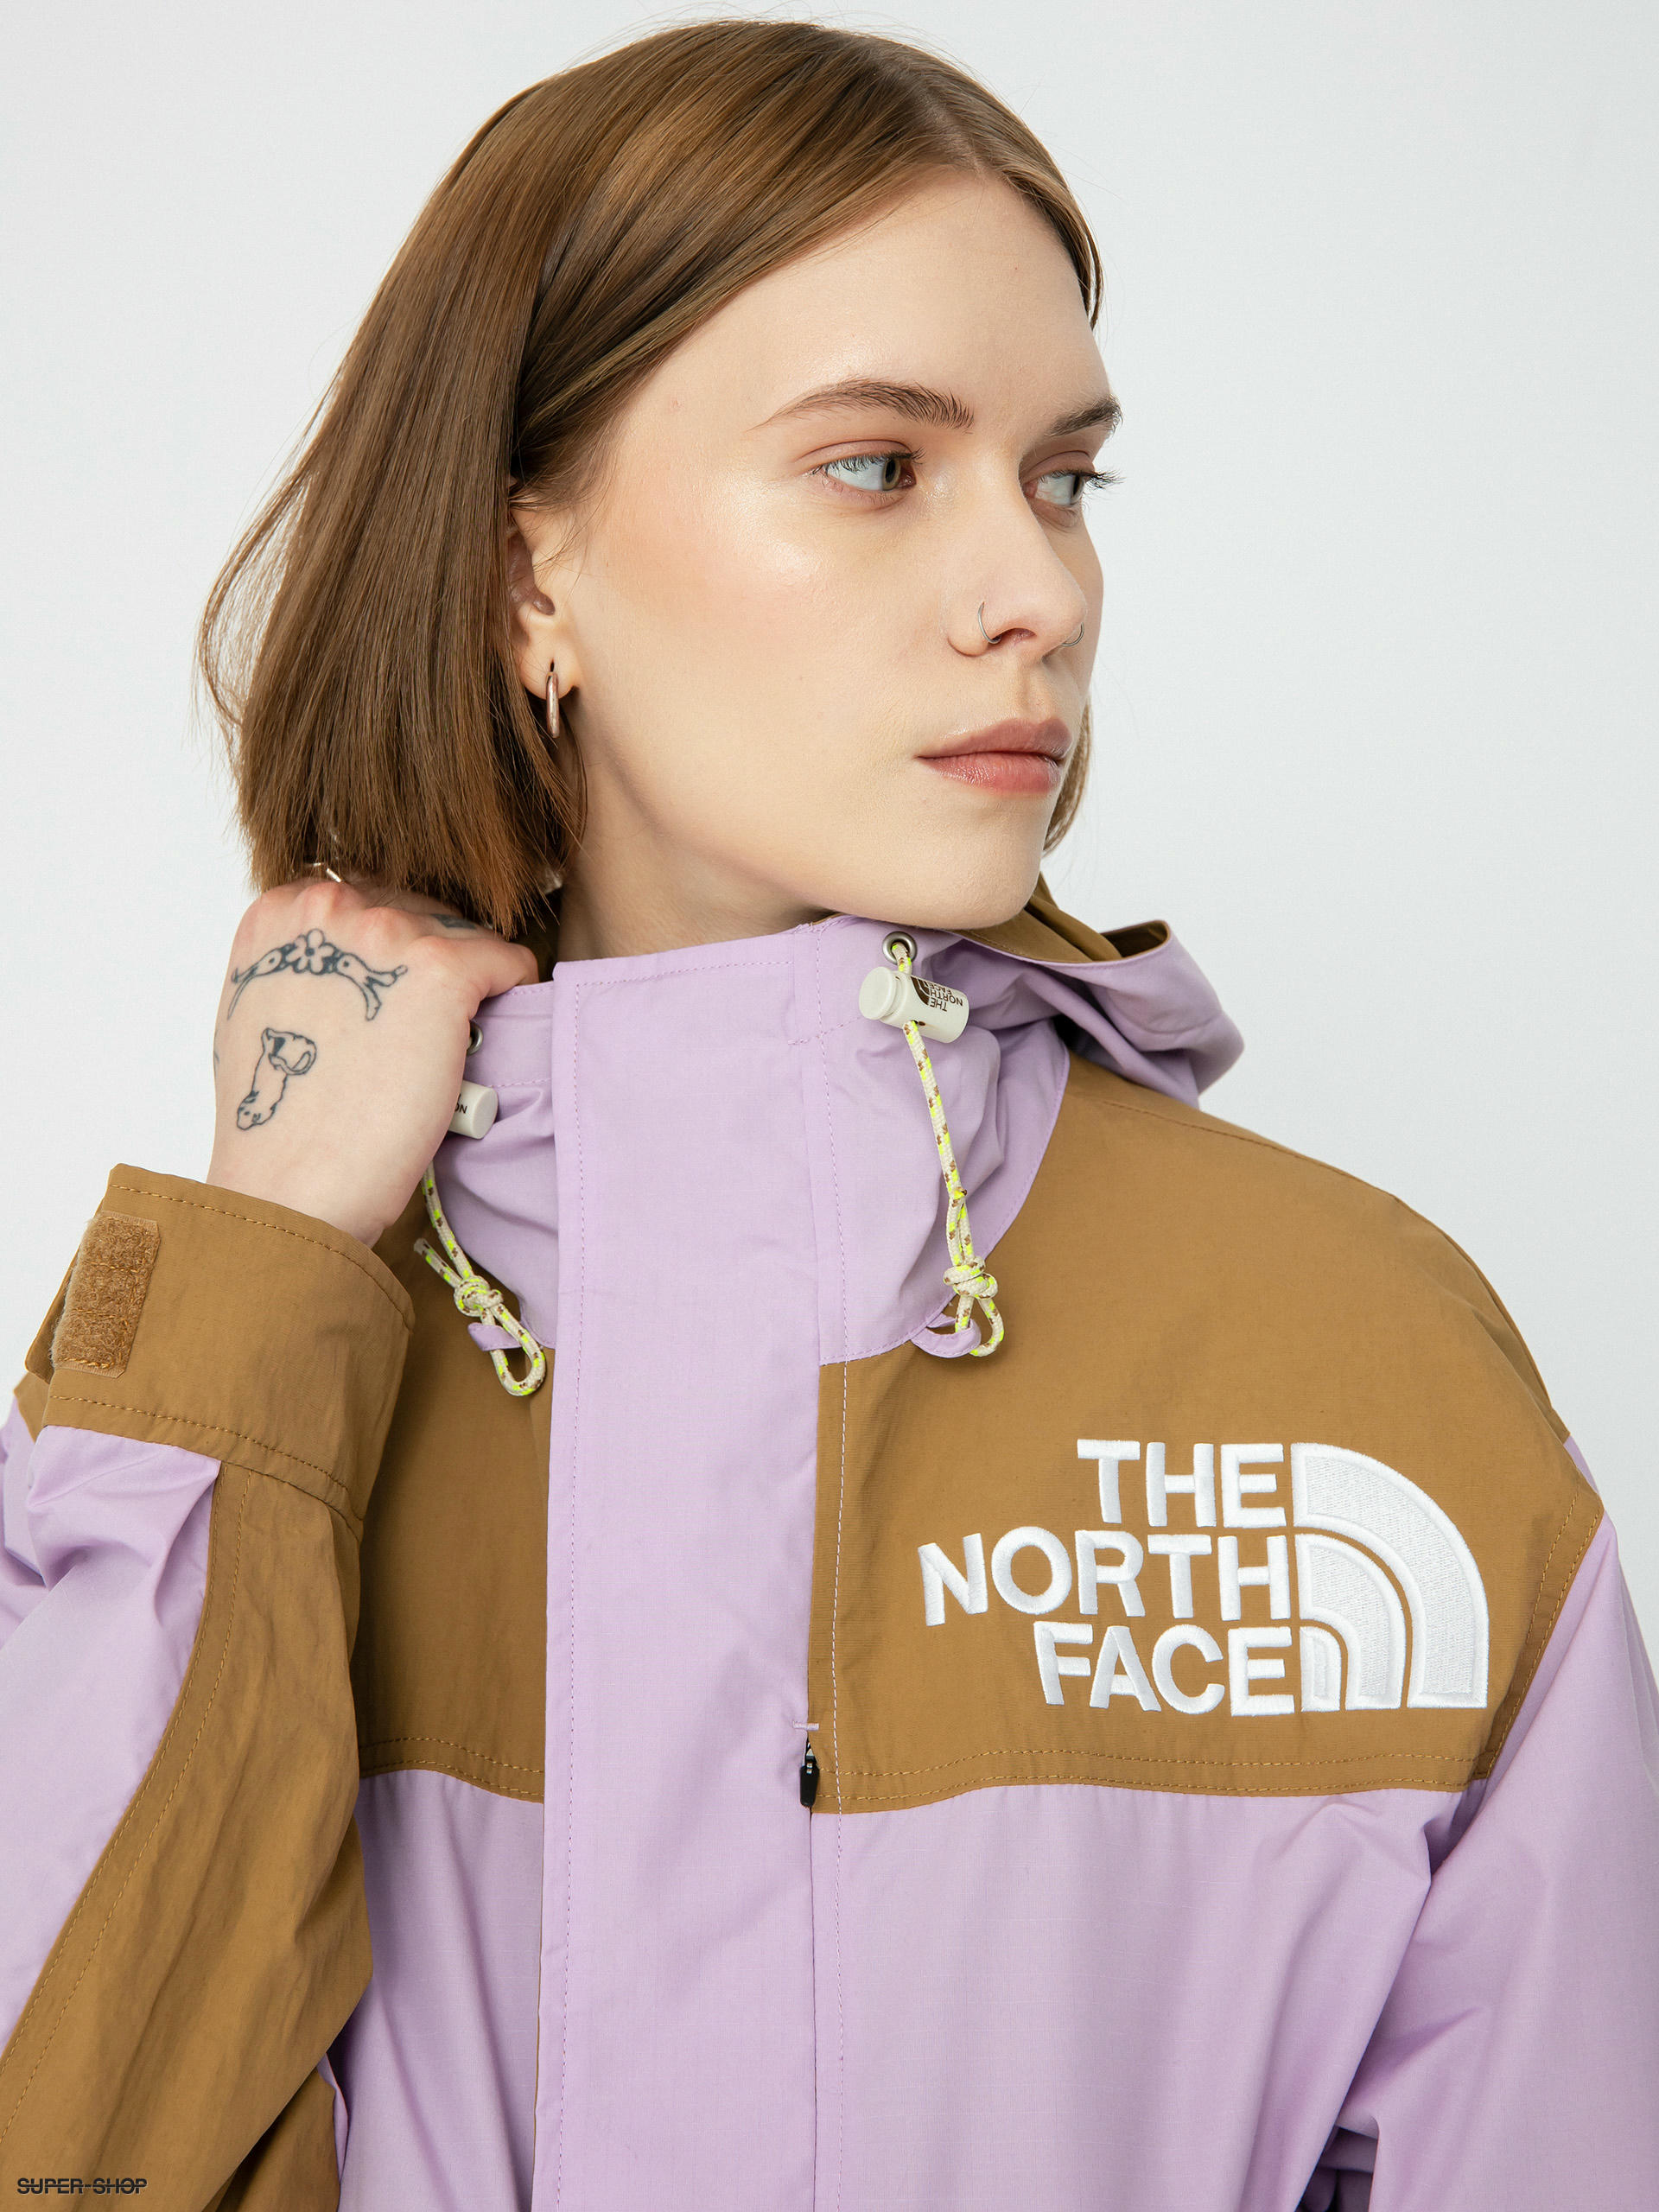 The North Face Women's '86 Low-Fi Hi-Tek Mountain Short Jacket, The North  Face